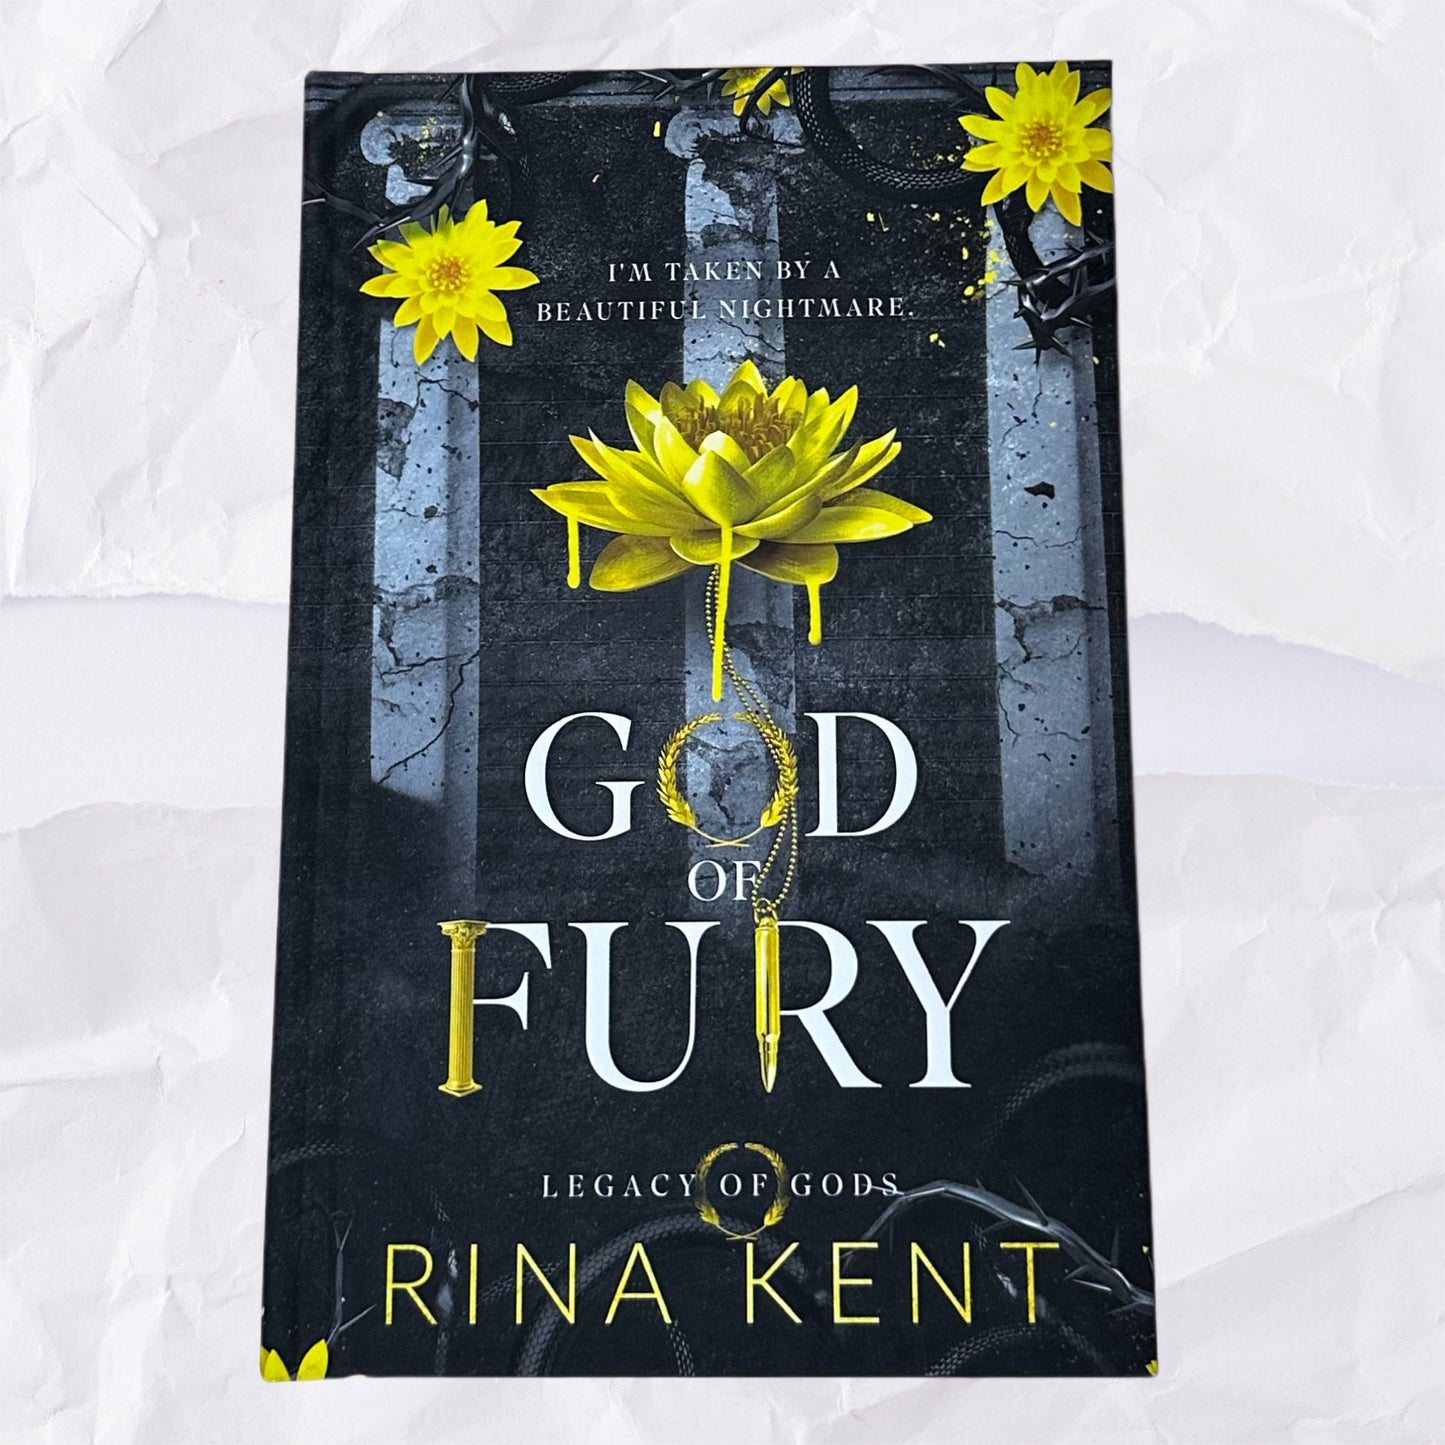 God of Fury (Legacy of Gods #5) by Rina Kent - Special Edition Print - Hardcover